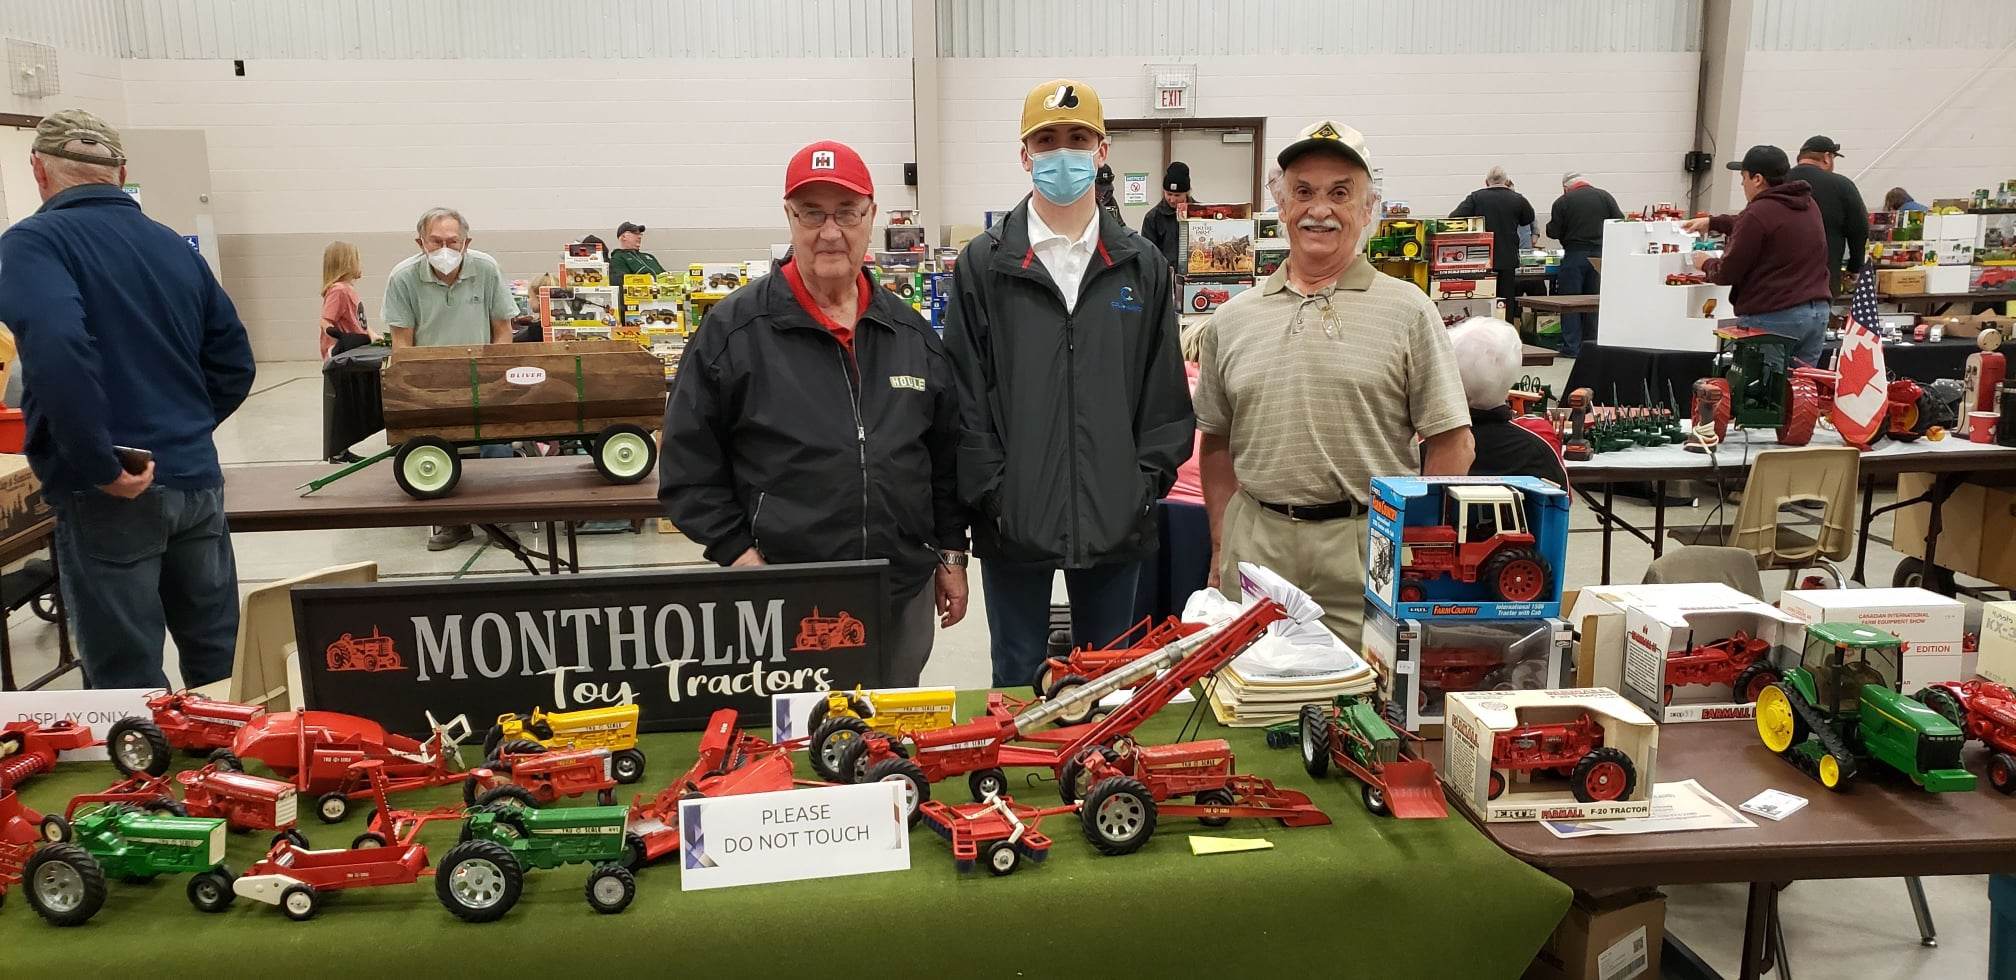 Local toy show for charity returns in a big way